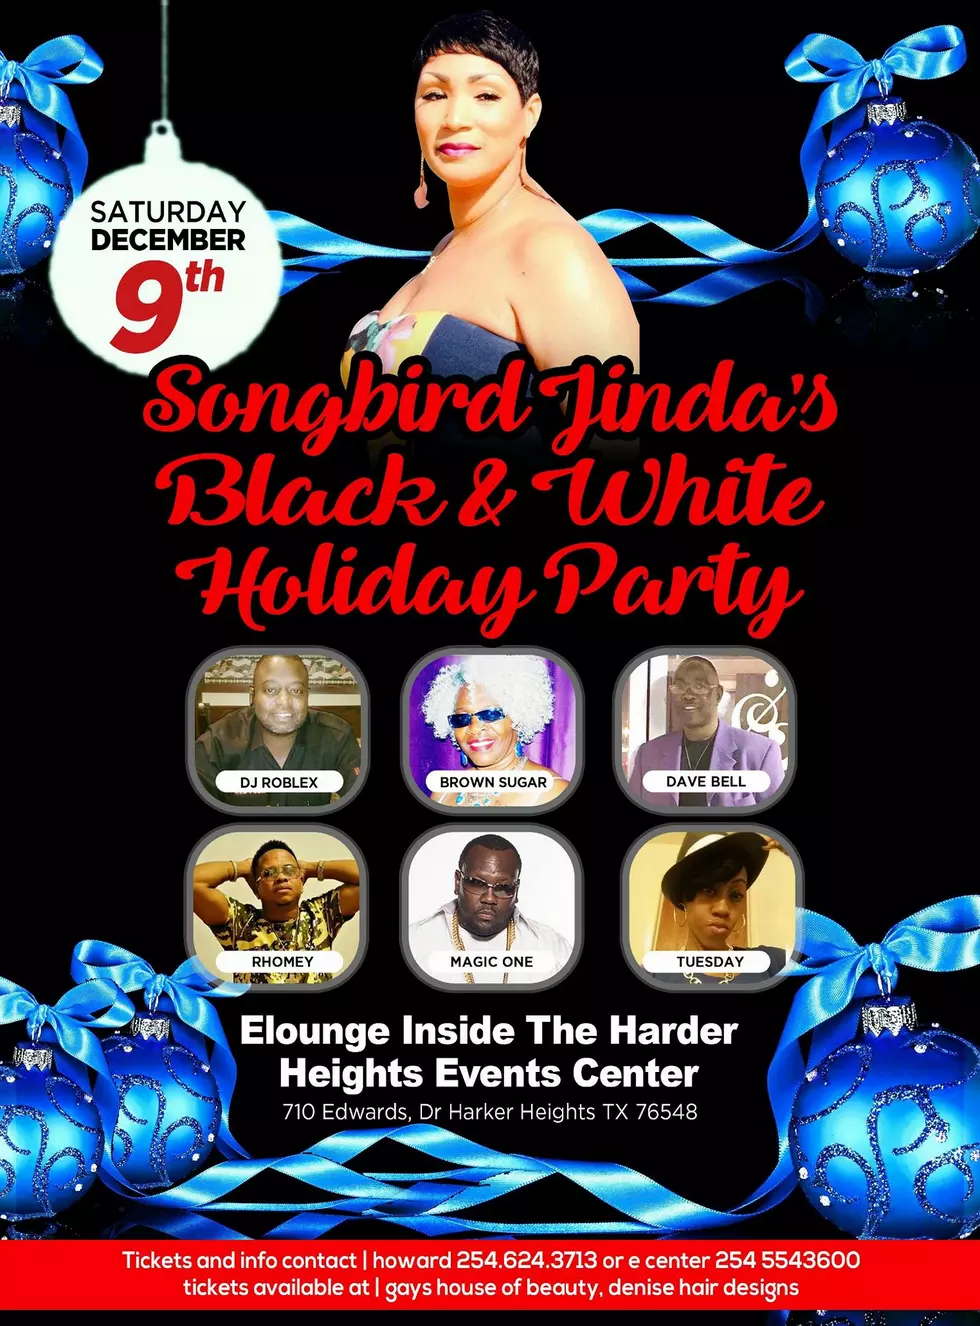 The Songbird Jinda’s Black & White Holiday Party In Harker Heights